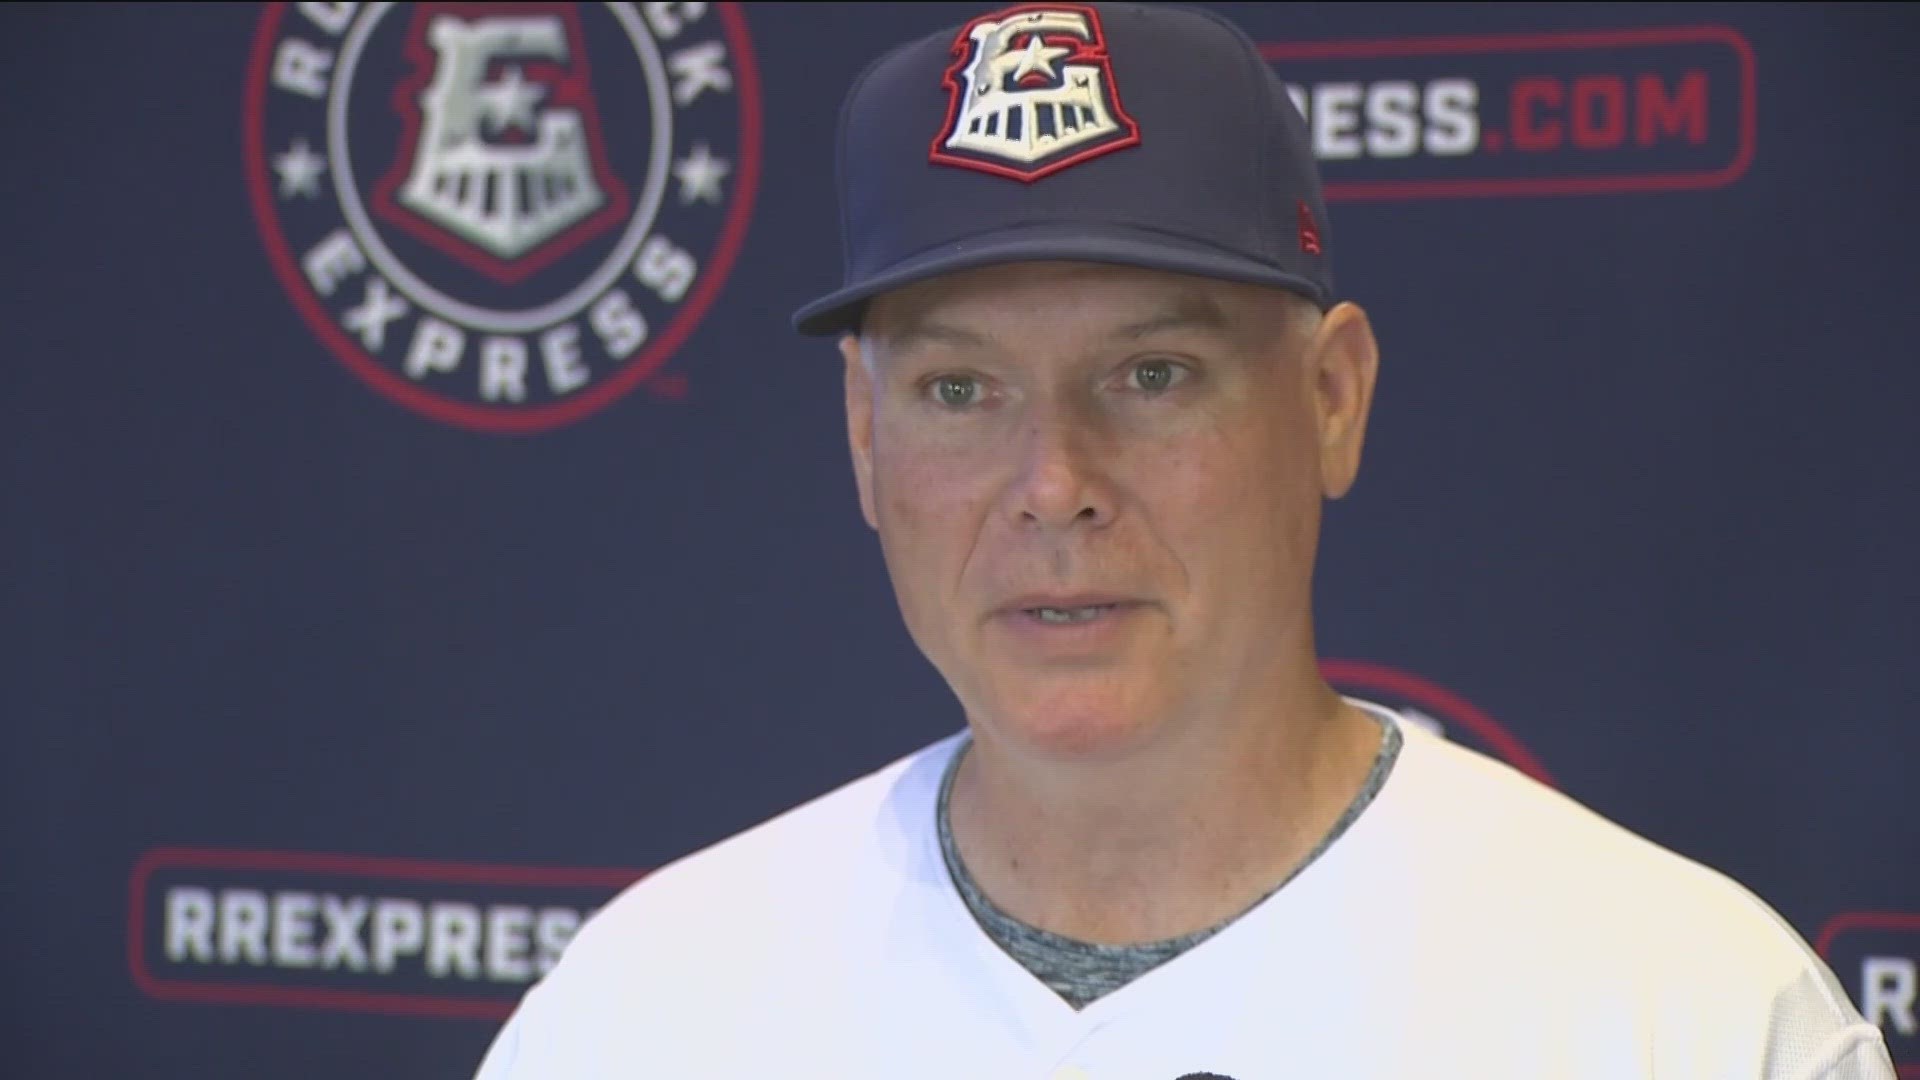 The Round Rock Express is under new leadership this year! New manager Doug Davis is coming from the Yankees' affiliate, the Scranton/Wilkes-Barre RailRiders.